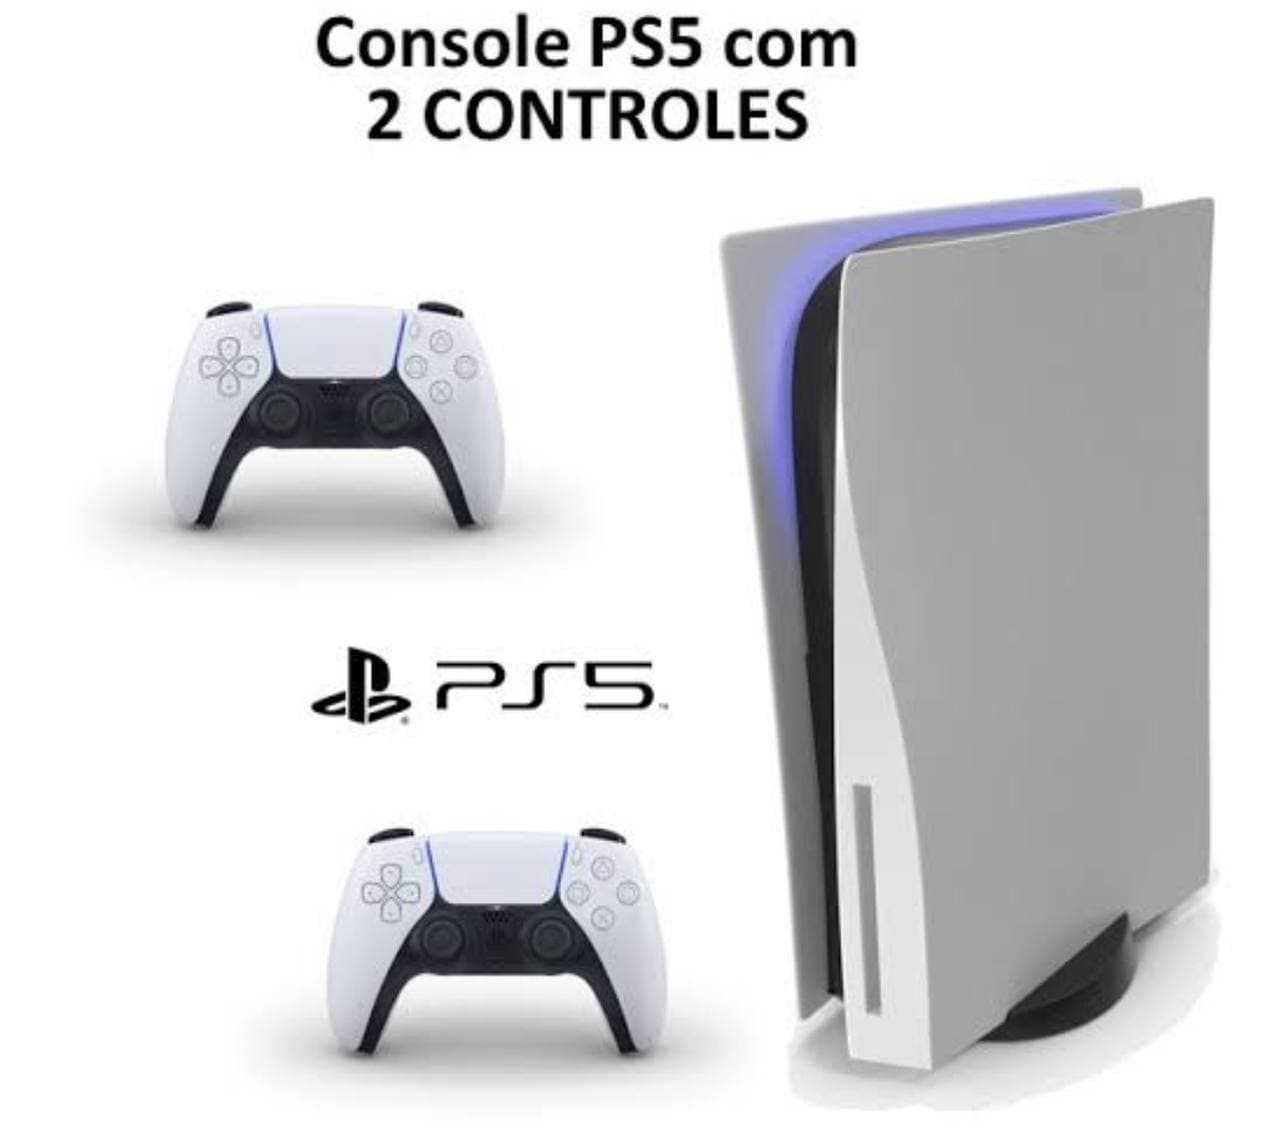 Console Playstation 5 - PS5 + Controle Dualsense Playstation 5 +